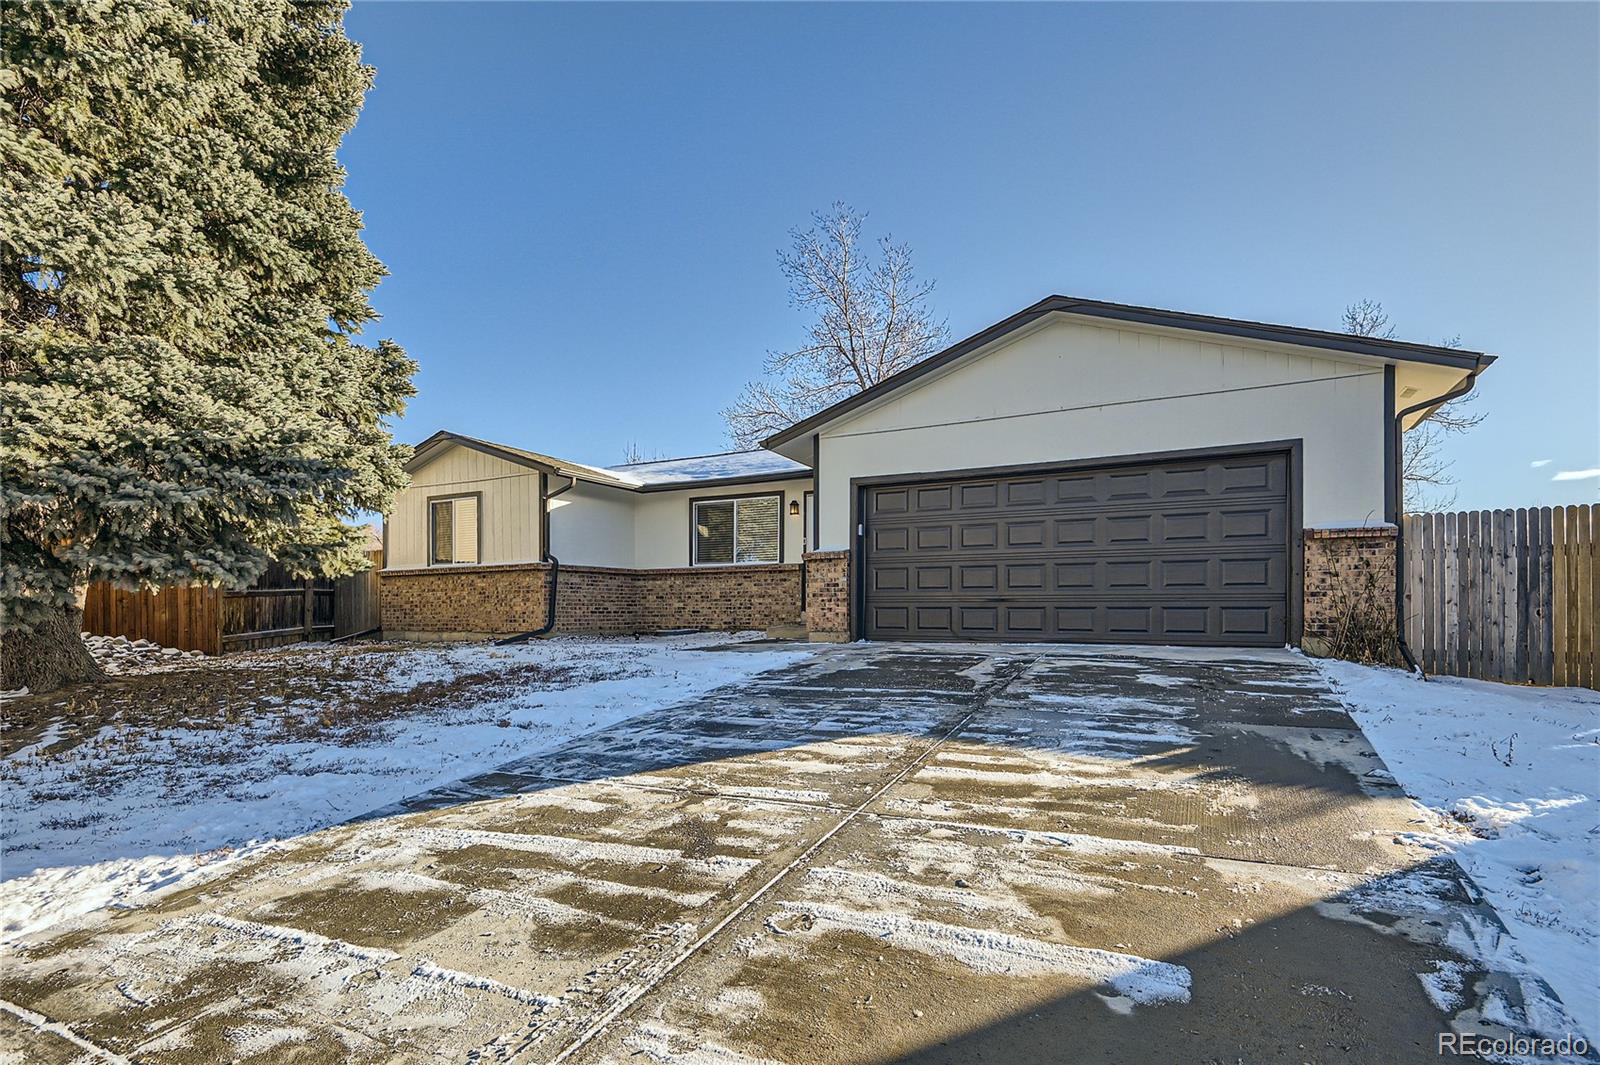 8674 W 86th Place, arvada MLS: 7626887 Beds: 3 Baths: 1 Price: $525,000